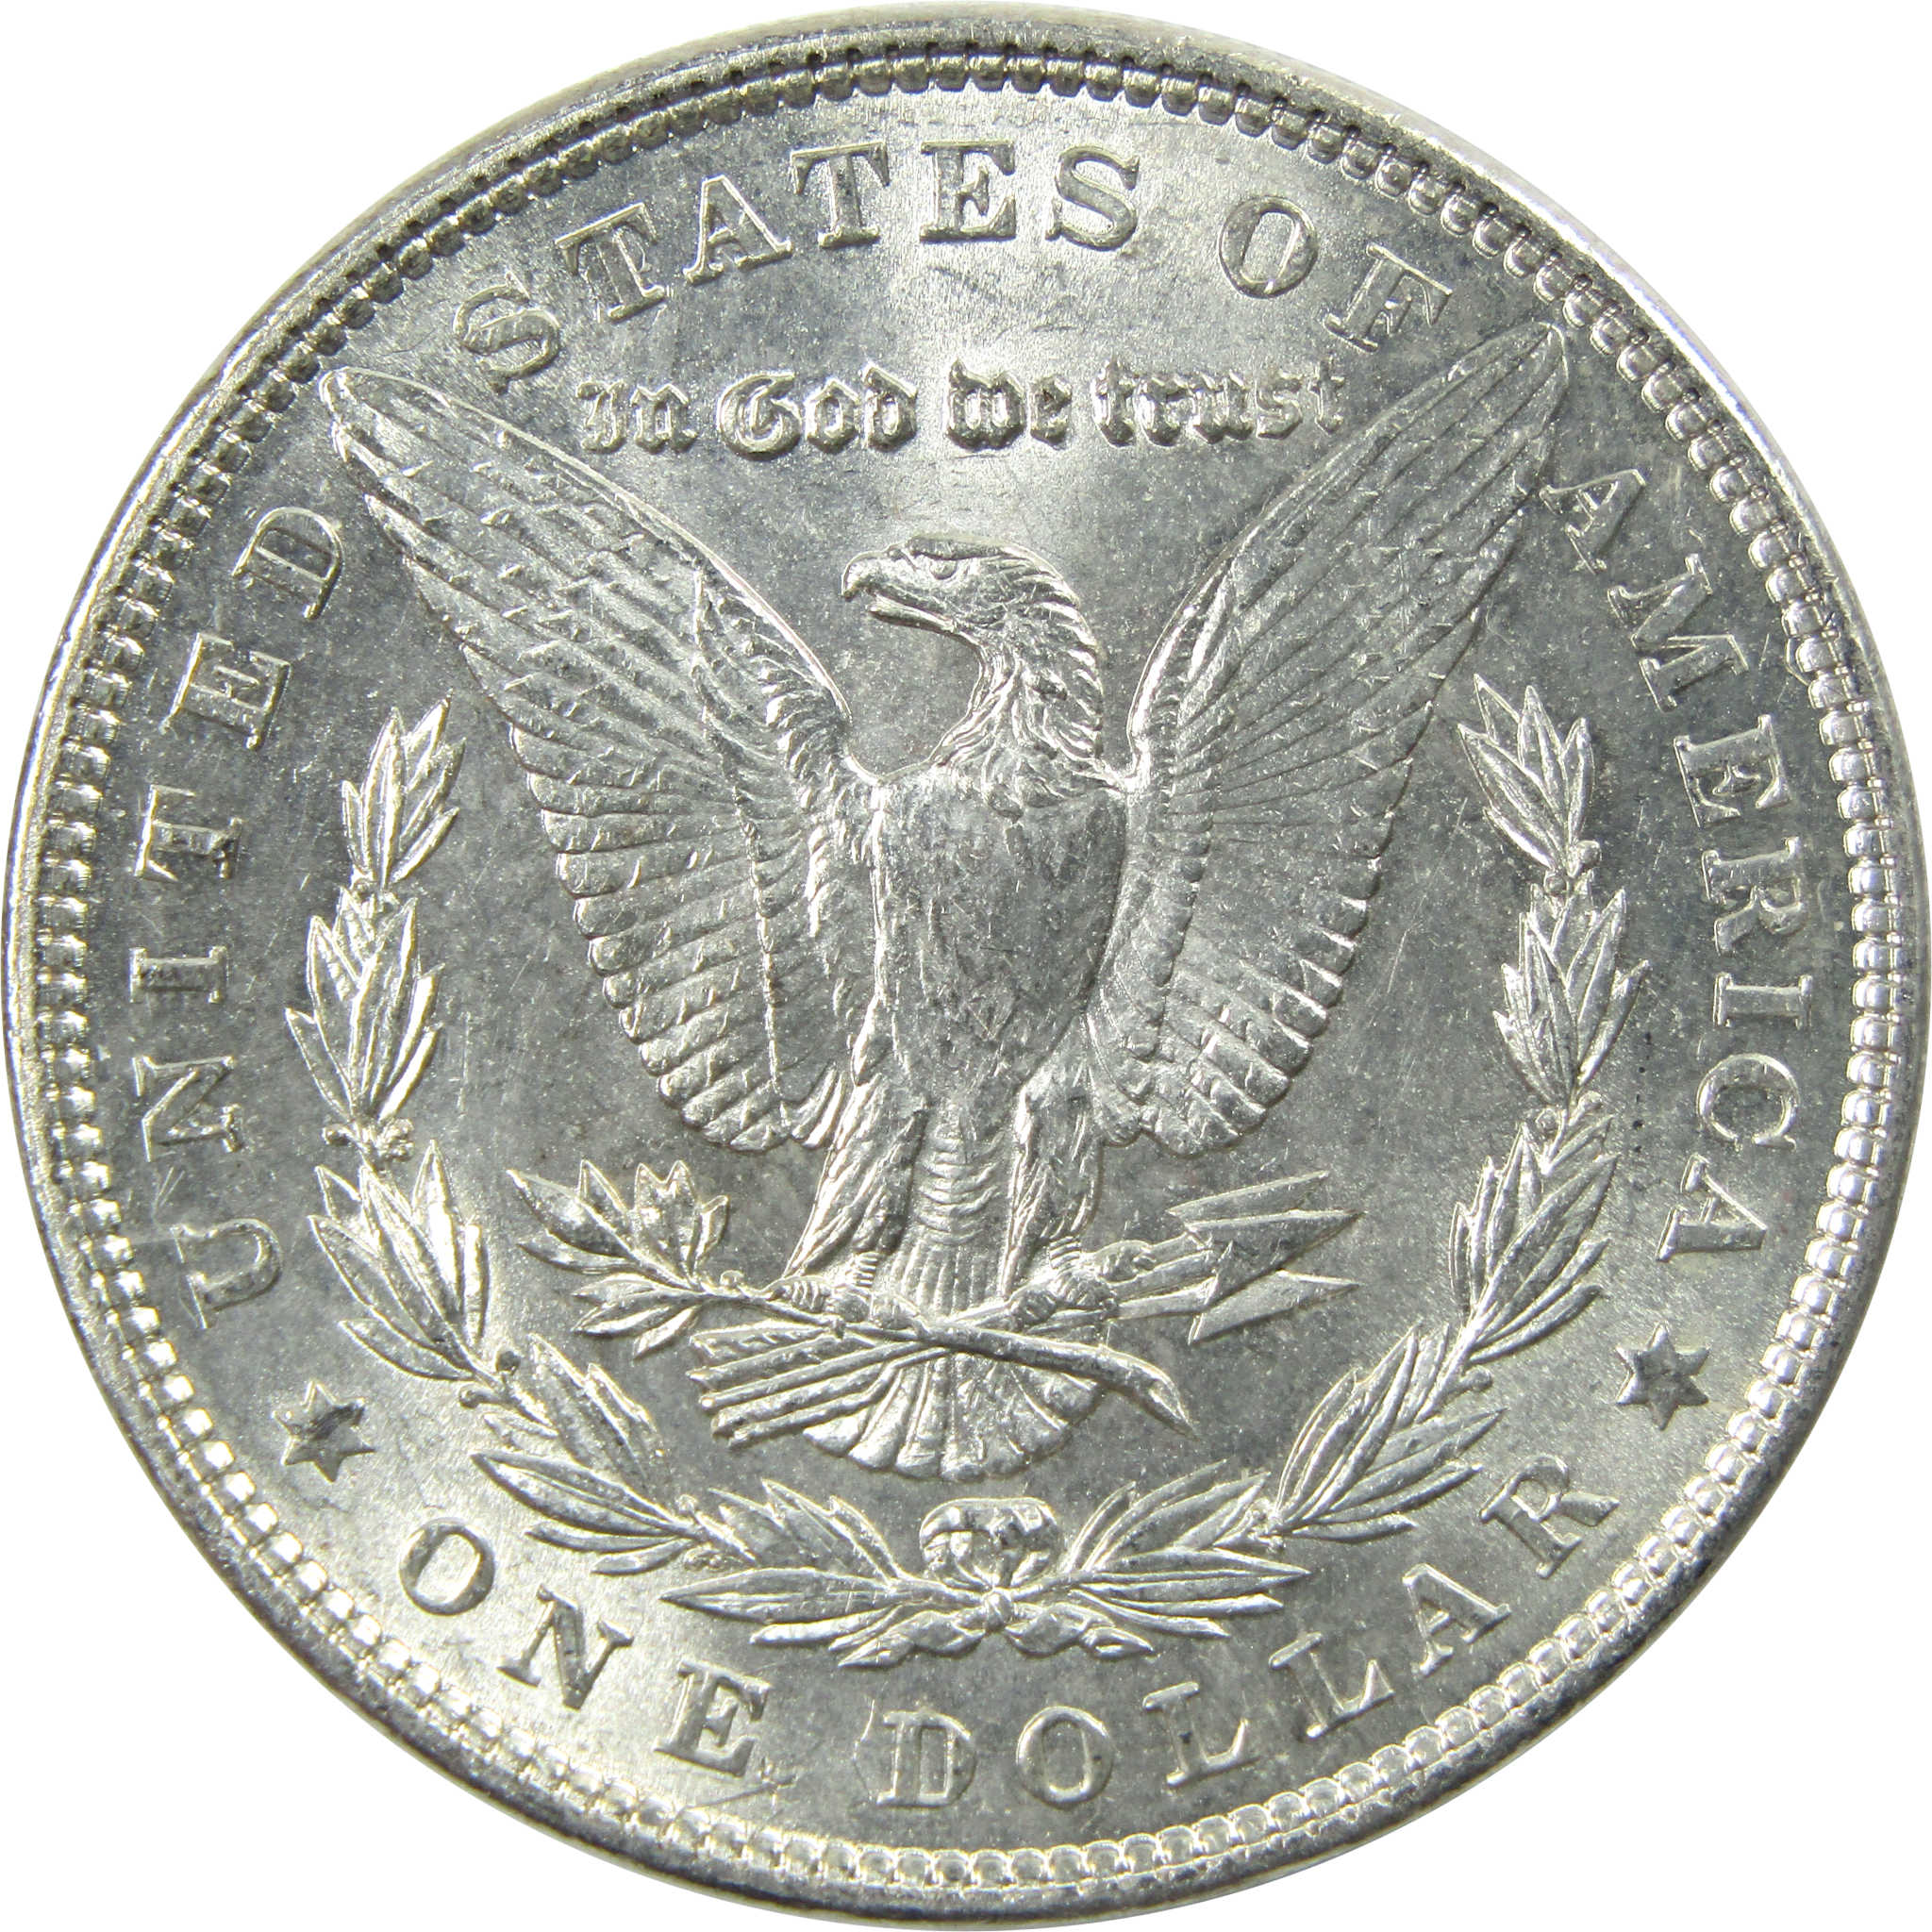 1903 Morgan Dollar AU About Uncirculated Silver $1 Coin SKU:I13631 - Morgan coin - Morgan silver dollar - Morgan silver dollar for sale - Profile Coins &amp; Collectibles